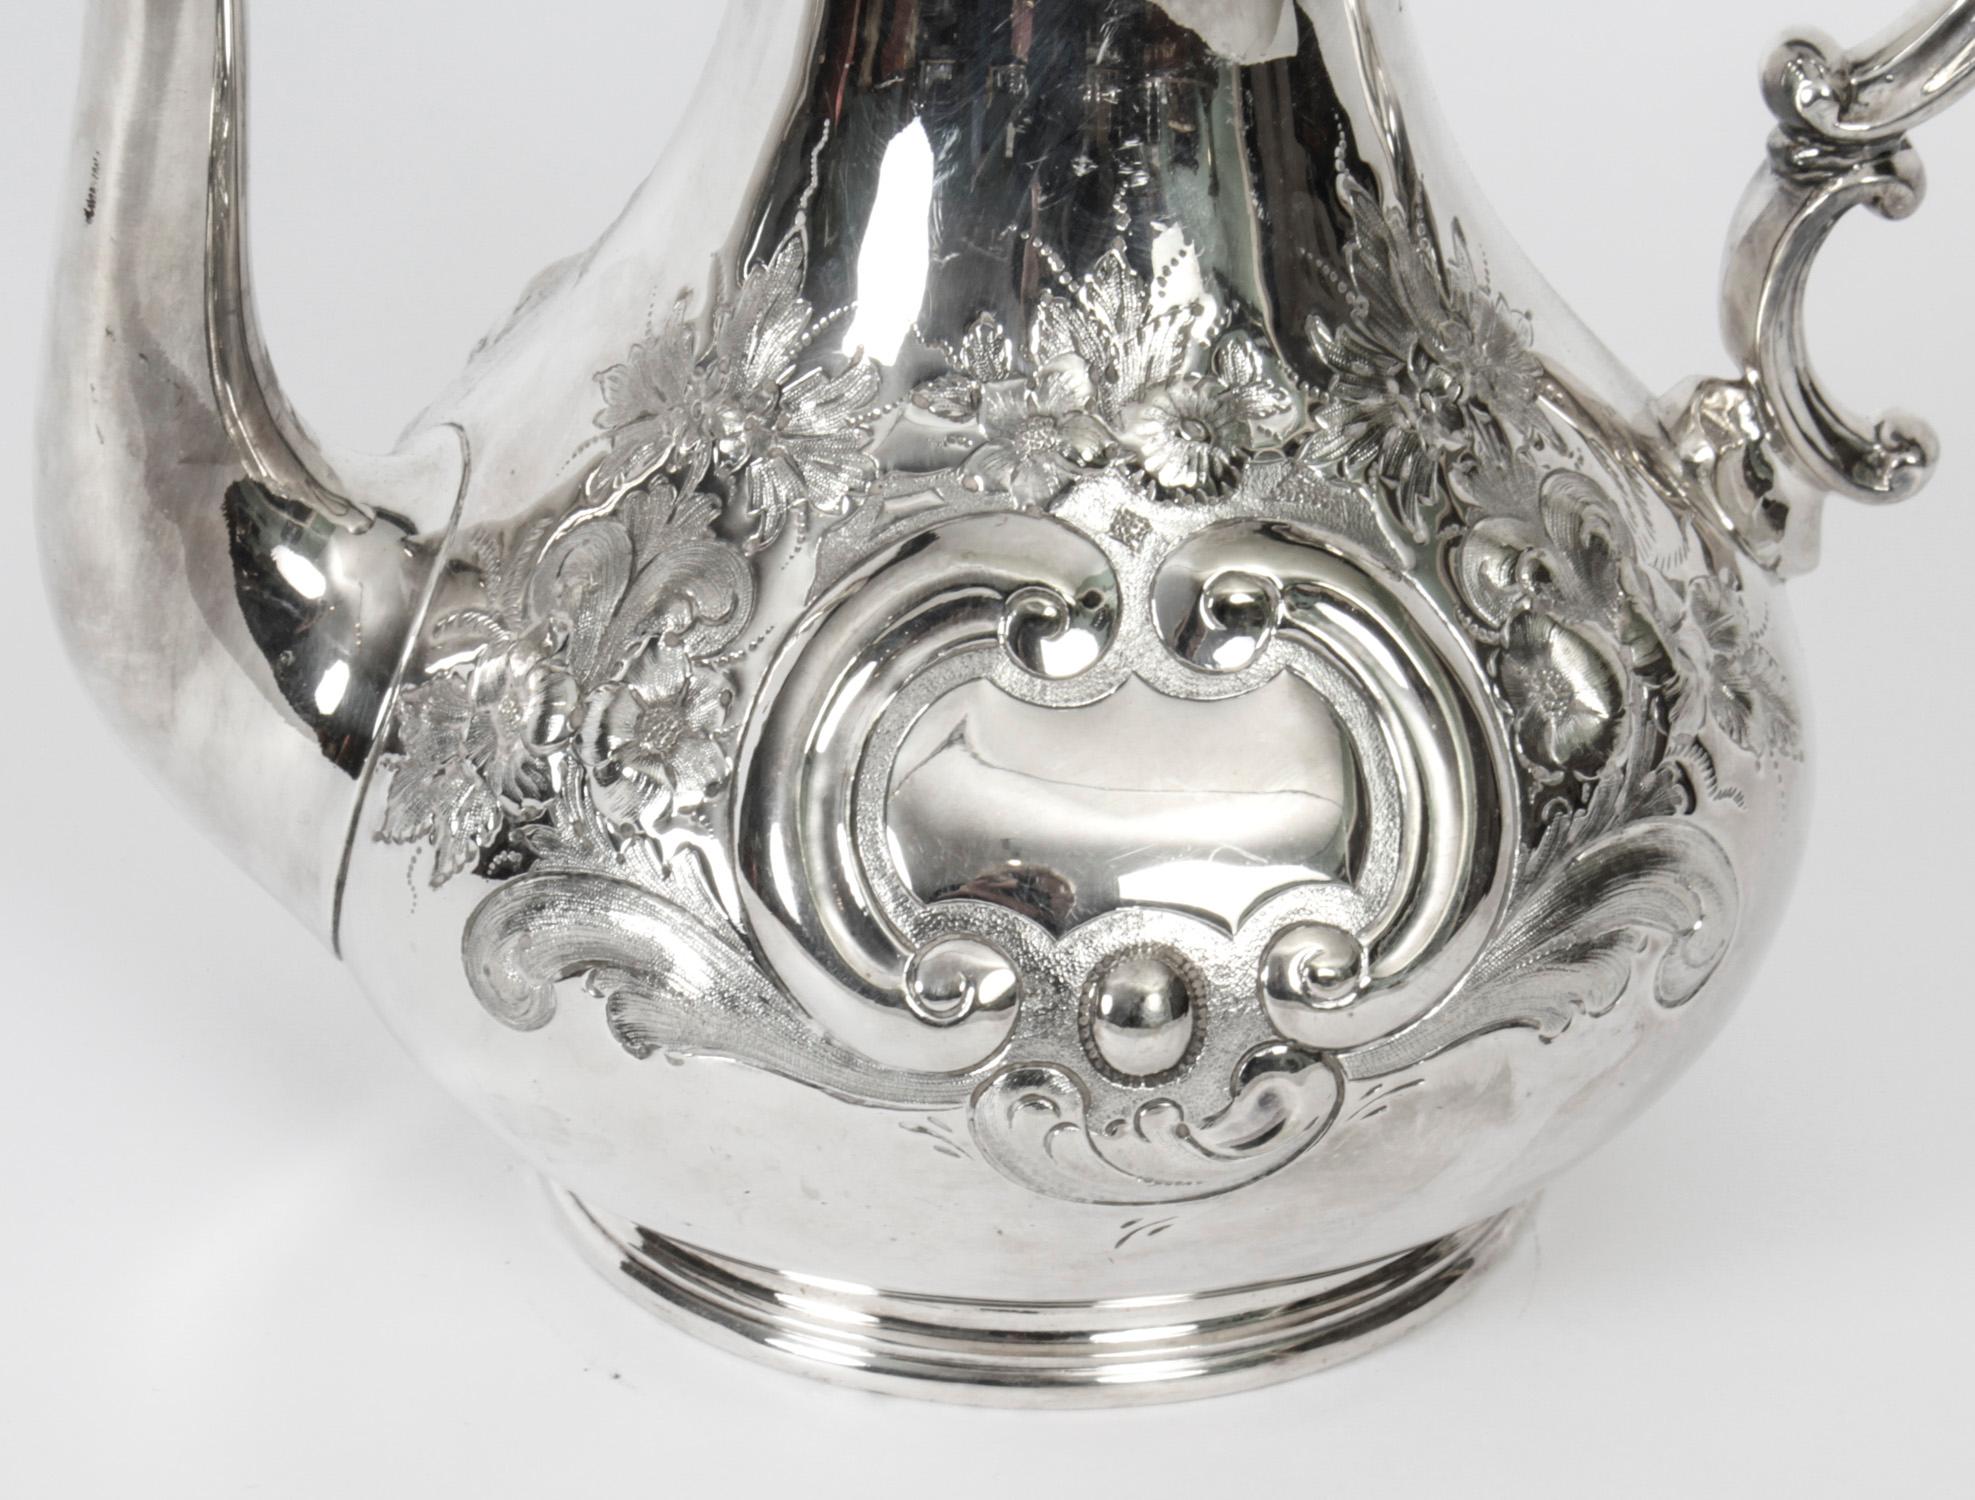 This is a lovely antique Victorian silver plated coffee pot by Boardman Glossop & Co, Sheffield dating from Circa 1870.

The coffee pot features a baluster form which is decorated with chased and engraved foliate and floral ornamentation, with an